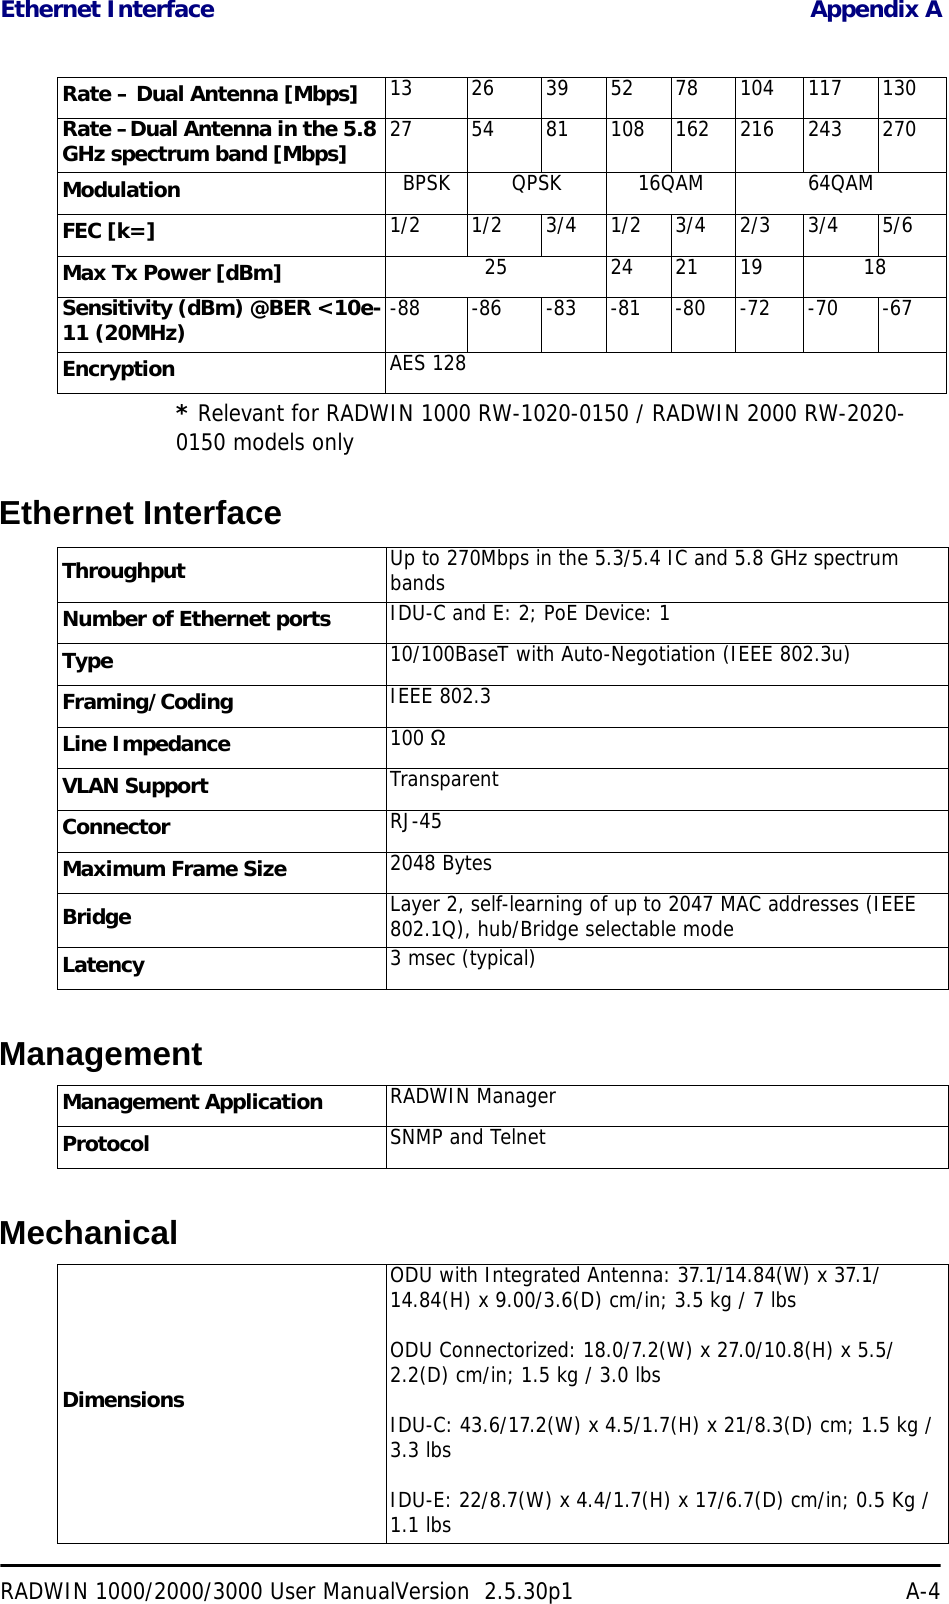 Ethernet Interface Appendix ARADWIN 1000/2000/3000 User ManualVersion  2.5.30p1 A-4* Relevant for RADWIN 1000 RW-1020-0150 / RADWIN 2000 RW-2020-0150 models onlyEthernet InterfaceManagementMechanicalRate – Dual Antenna [Mbps] 13 26 39 52 78 104 117 130Rate –Dual Antenna in the 5.8 GHz spectrum band [Mbps] 27 54 81 108 162 216 243 270Modulation BPSK QPSK 16QAM 64QAMFEC [k=] 1/2 1/2 3/4 1/2 3/4 2/3 3/4 5/6Max Tx Power [dBm] 25 24 21 19 18Sensitivity (dBm) @BER &lt;10e-11 (20MHz) -88 -86 -83 -81 -80 -72 -70 -67Encryption AES 128Throughput Up to 270Mbps in the 5.3/5.4 IC and 5.8 GHz spectrum bandsNumber of Ethernet ports IDU-C and E: 2; PoE Device: 1Type 10/100BaseT with Auto-Negotiation (IEEE 802.3u)Framing/Coding IEEE 802.3Line Impedance 100 ΩVLAN Support TransparentConnector RJ-45Maximum Frame Size 2048 BytesBridge Layer 2, self-learning of up to 2047 MAC addresses (IEEE 802.1Q), hub/Bridge selectable modeLatency 3 msec (typical)Management Application RADWIN ManagerProtocol SNMP and TelnetDimensionsODU with Integrated Antenna: 37.1/14.84(W) x 37.1/14.84(H) x 9.00/3.6(D) cm/in; 3.5 kg / 7 lbsODU Connectorized: 18.0/7.2(W) x 27.0/10.8(H) x 5.5/2.2(D) cm/in; 1.5 kg / 3.0 lbsIDU-C: 43.6/17.2(W) x 4.5/1.7(H) x 21/8.3(D) cm; 1.5 kg / 3.3 lbsIDU-E: 22/8.7(W) x 4.4/1.7(H) x 17/6.7(D) cm/in; 0.5 Kg / 1.1 lbs